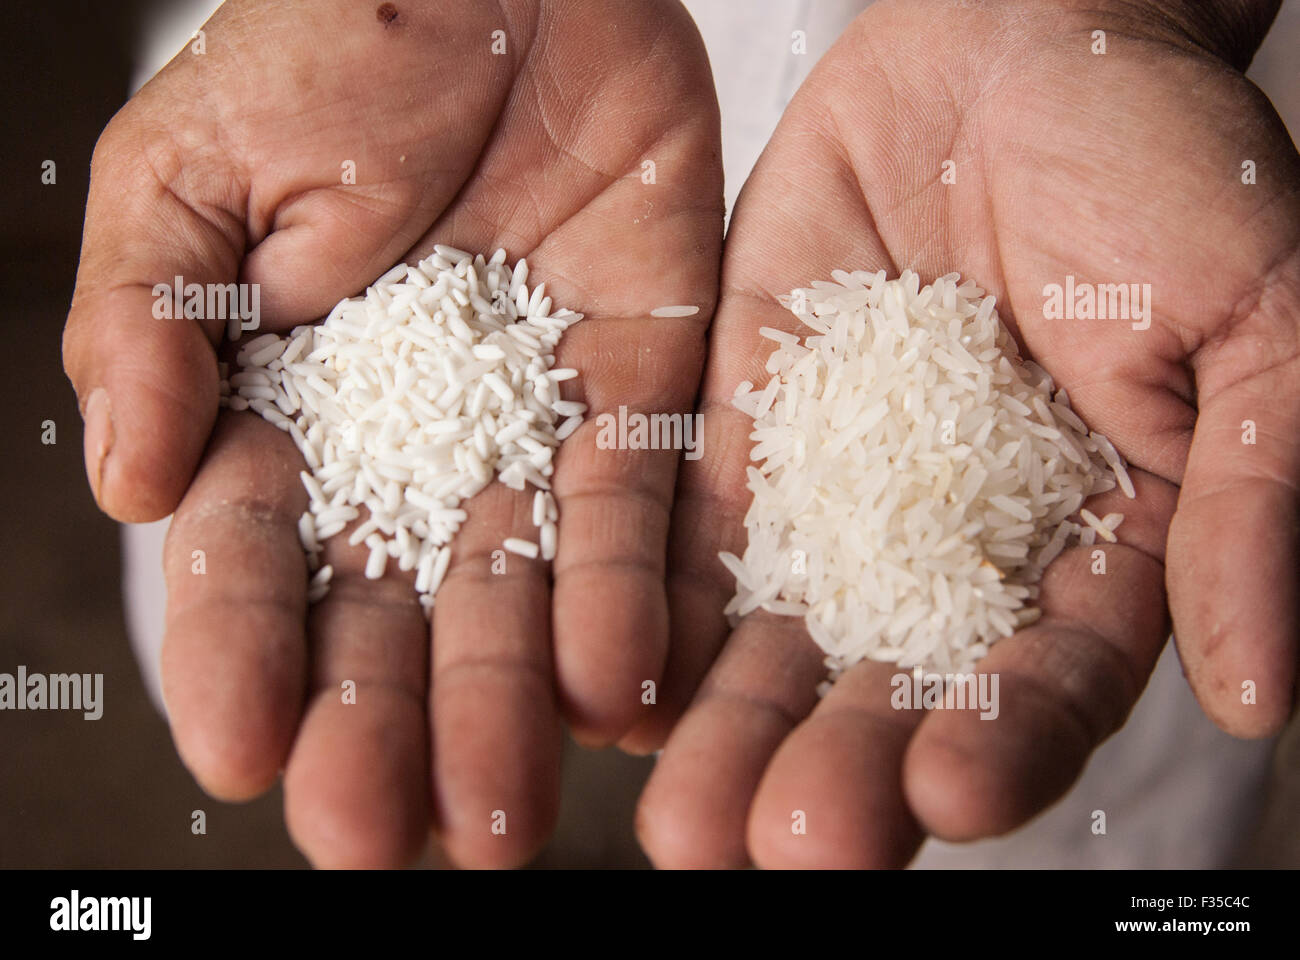 Farmer holds processed and unprocessed white rice in his rough hands during harvest in rural Issan, Thaliand, Asia Stock Photo